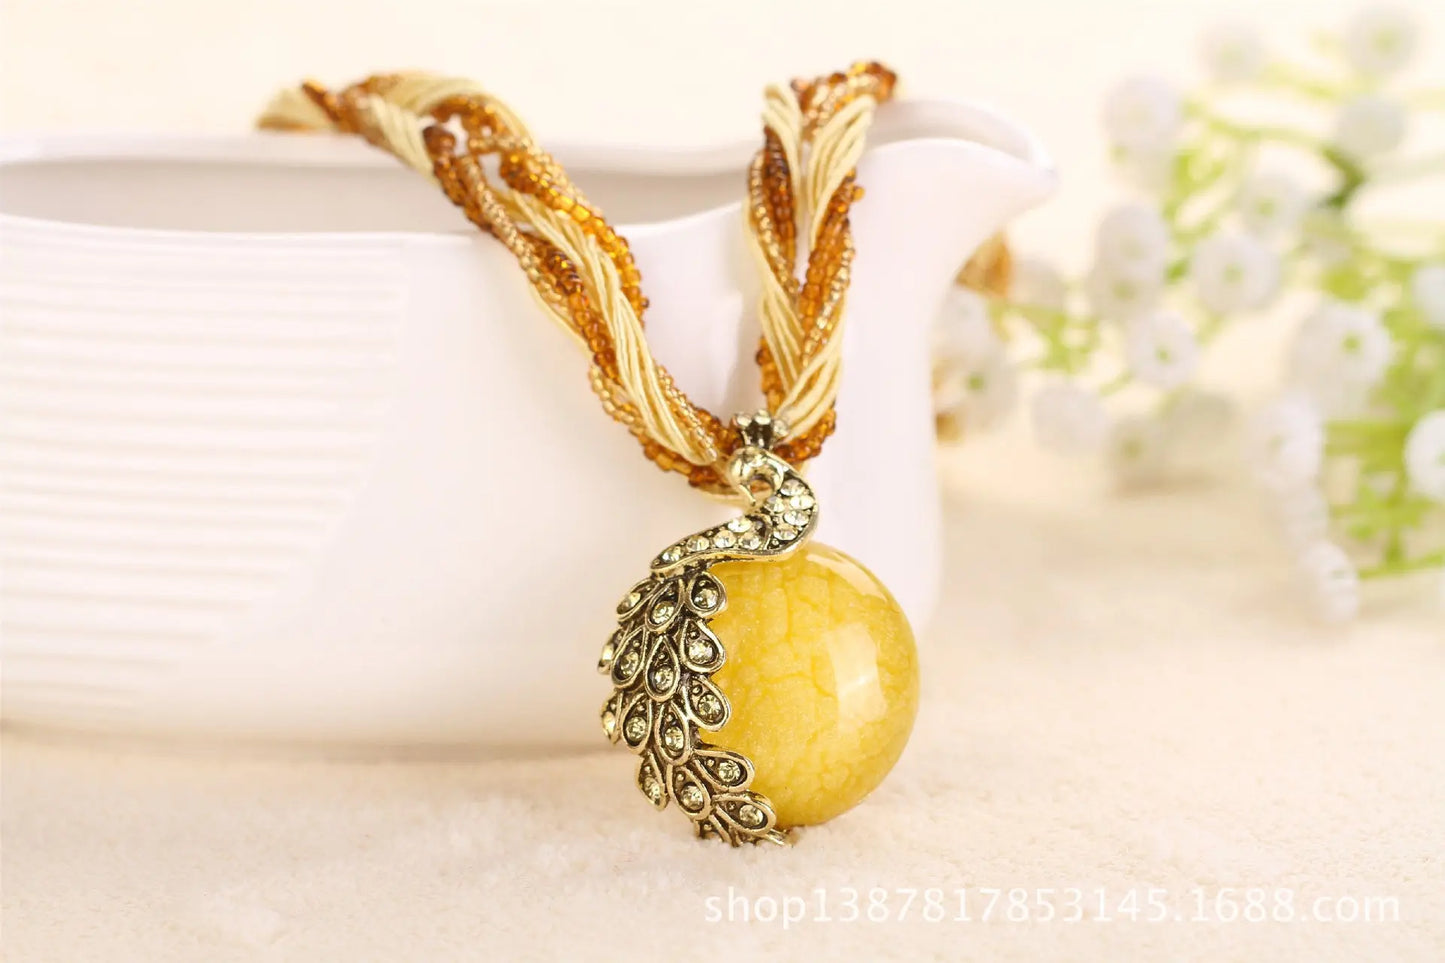 Boho Ethnic Jewelry Choker Handmade Pendant Necklace Natural Stone Bead Peacock Statement Maxi Necklace for Women Girls Gifts - Trending's Arena Beauty Boho Ethnic Jewelry Choker Handmade Pendant Necklace Natural Stone Bead Peacock Statement Maxi Necklace for Women Girls Gifts Electronics Facial & Neck yellow